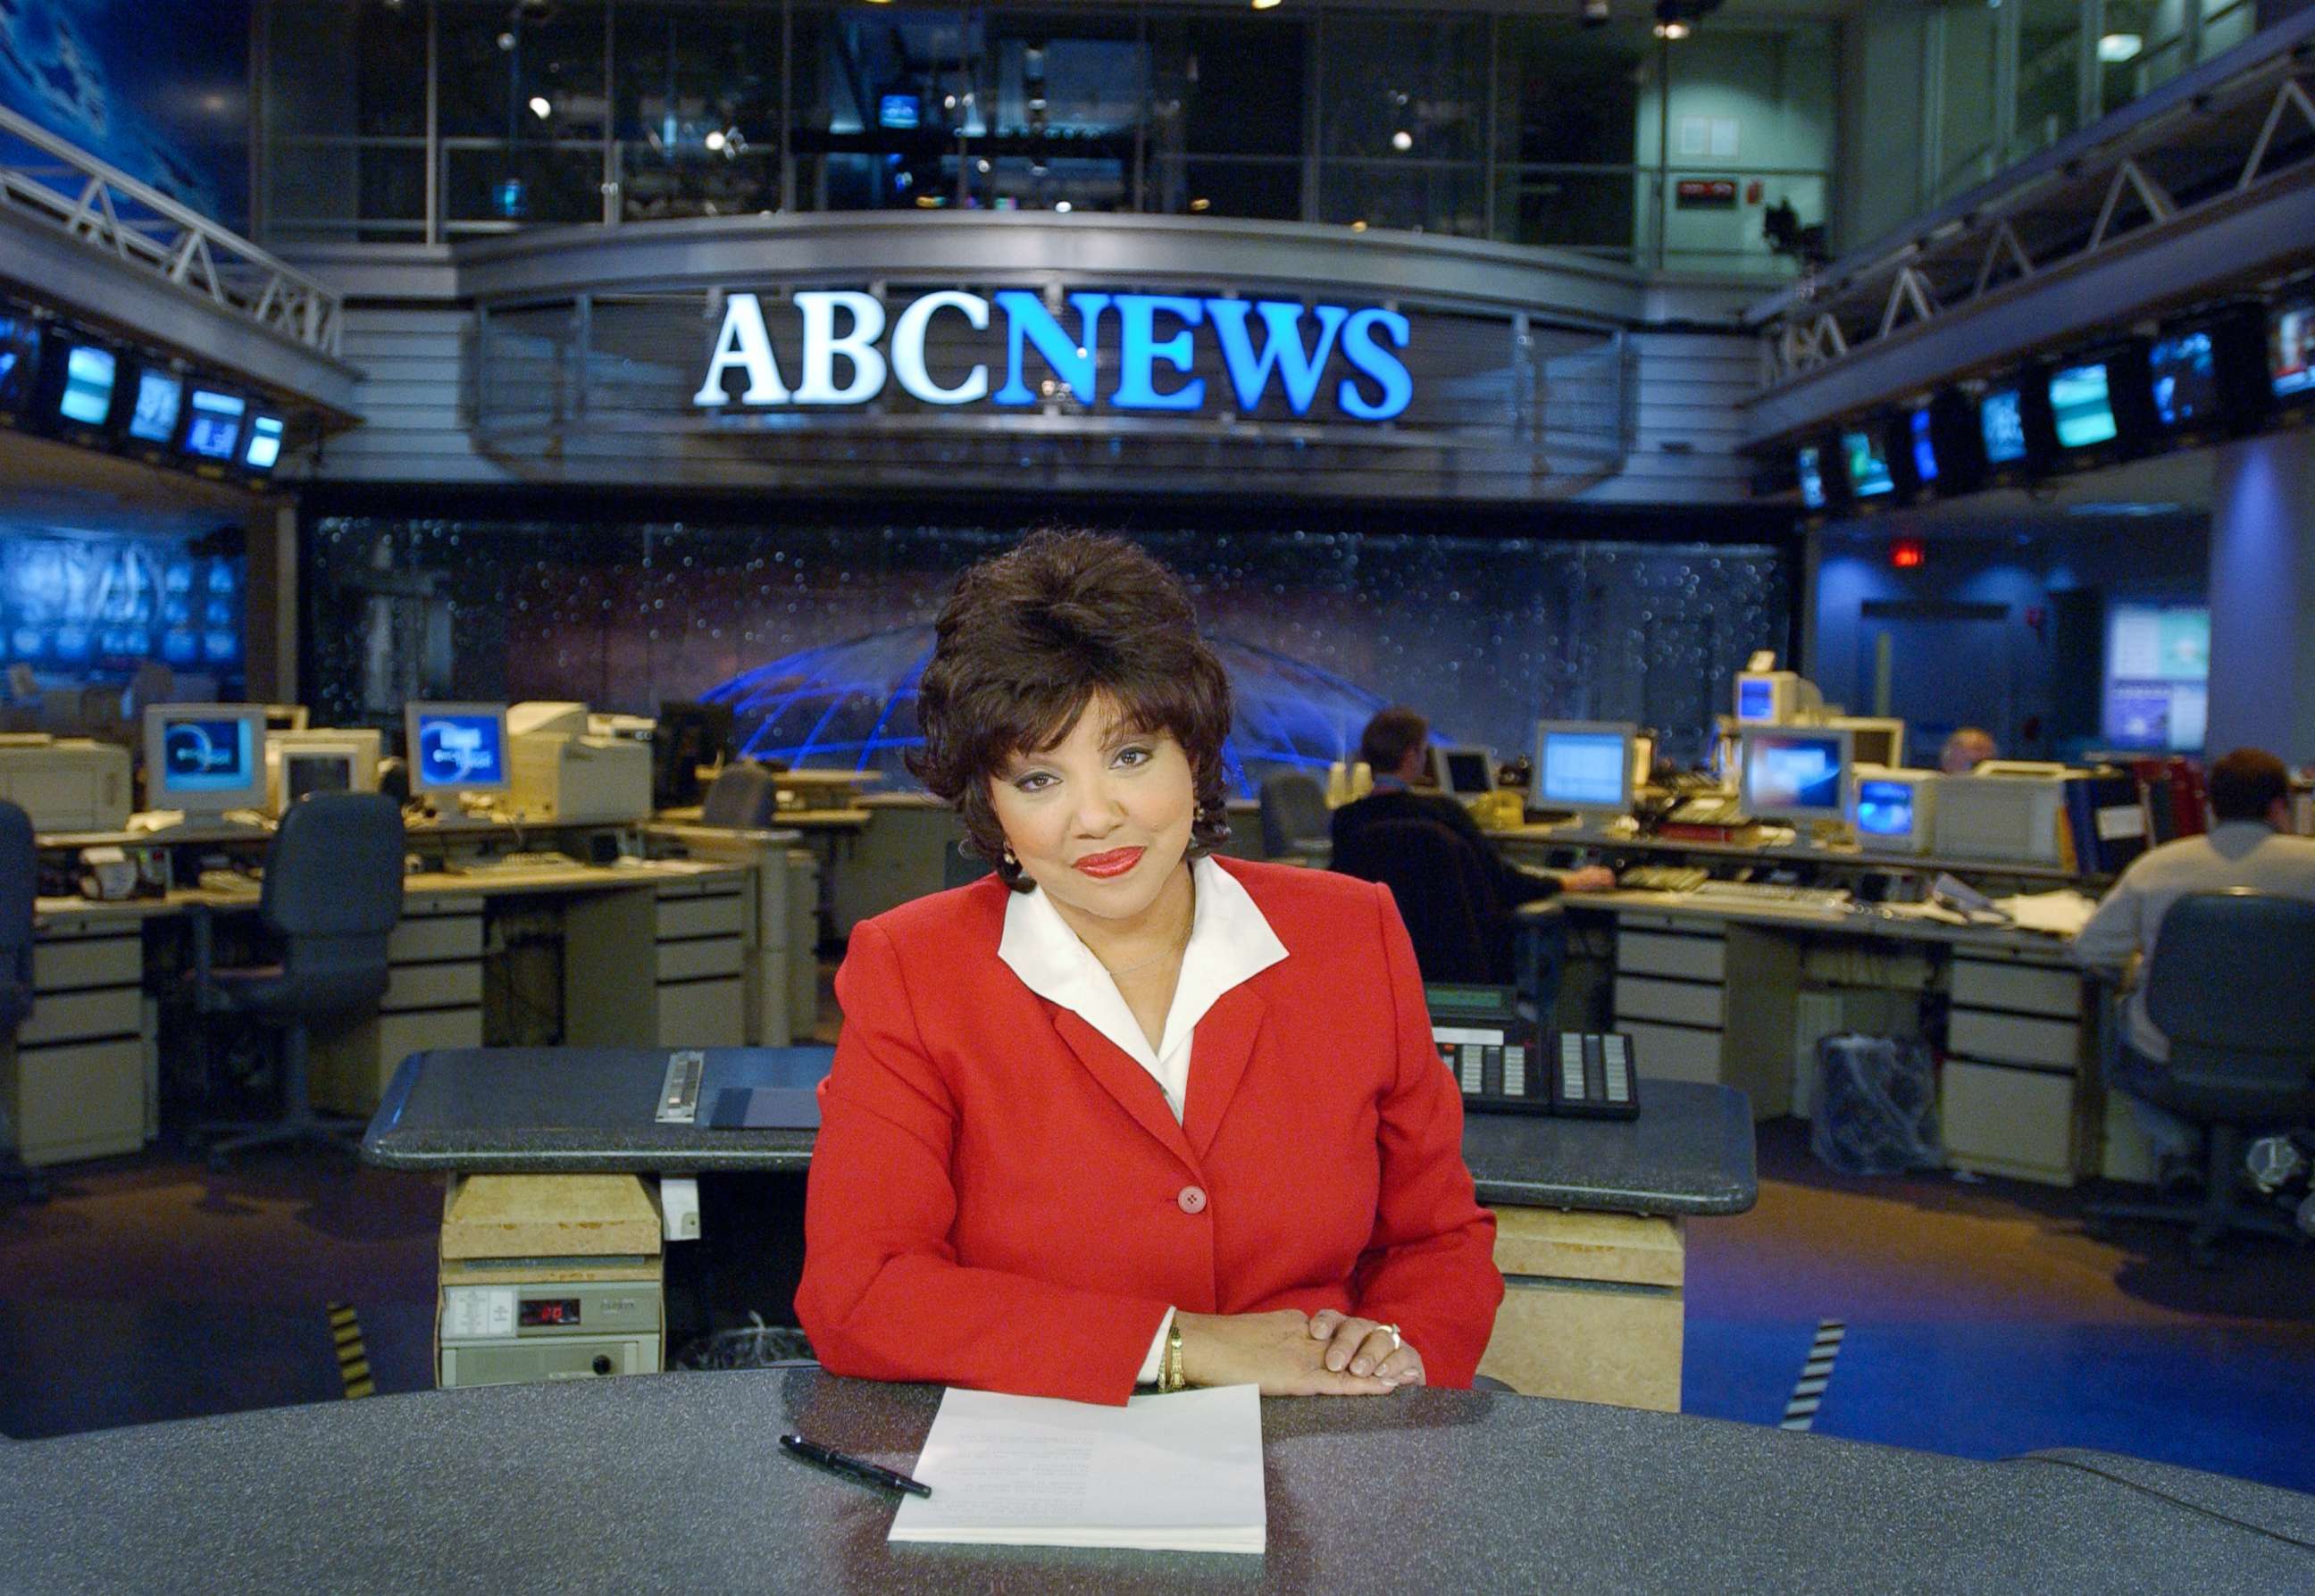 PHOTO: ABC News anchor Carole Simpson, who made history as the first Black woman to helm a major newscast, sits at the anchor desk in New York on April 12, 2002.